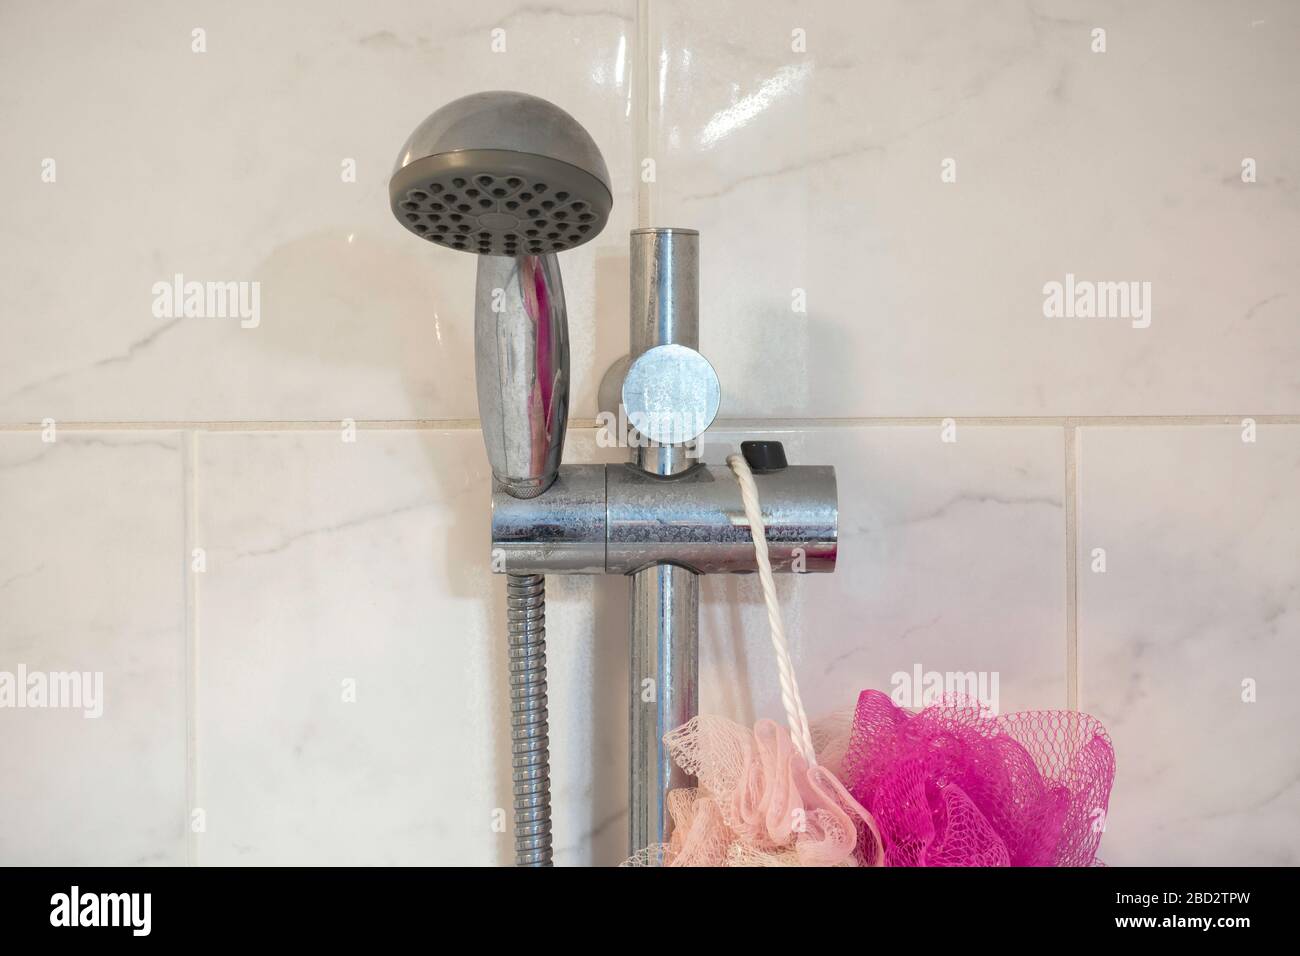 Dirty chrome shower rod with limescale that should be cleaned.  Calcified shower due to hard water. Calcium mineral buildup. Stock Photo